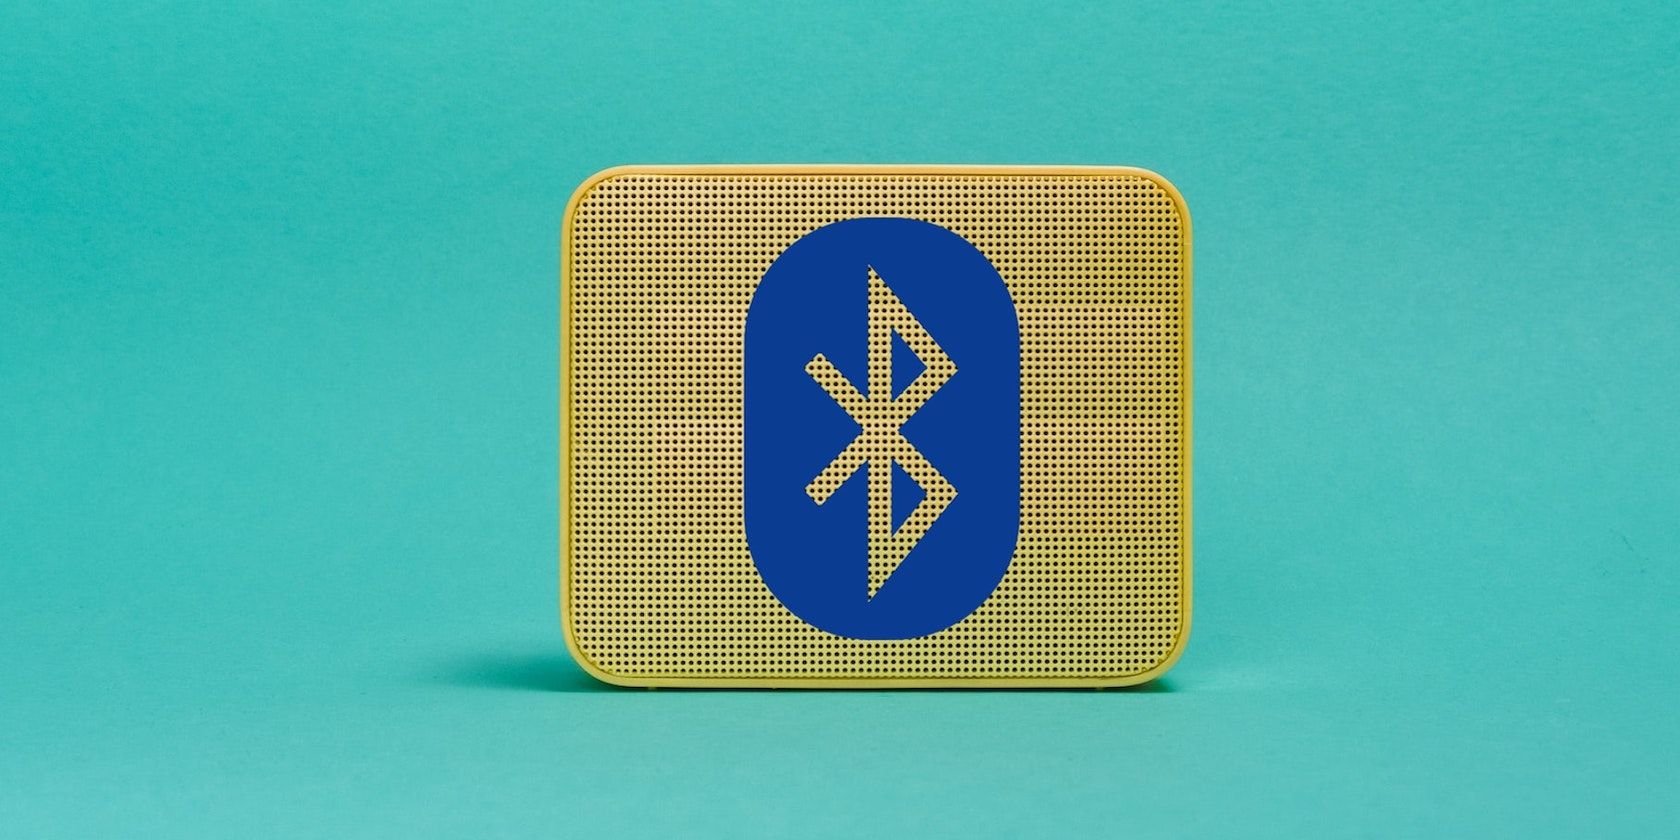 A bluetooth symbol on a yellow speaker in front of a bright turquoise background